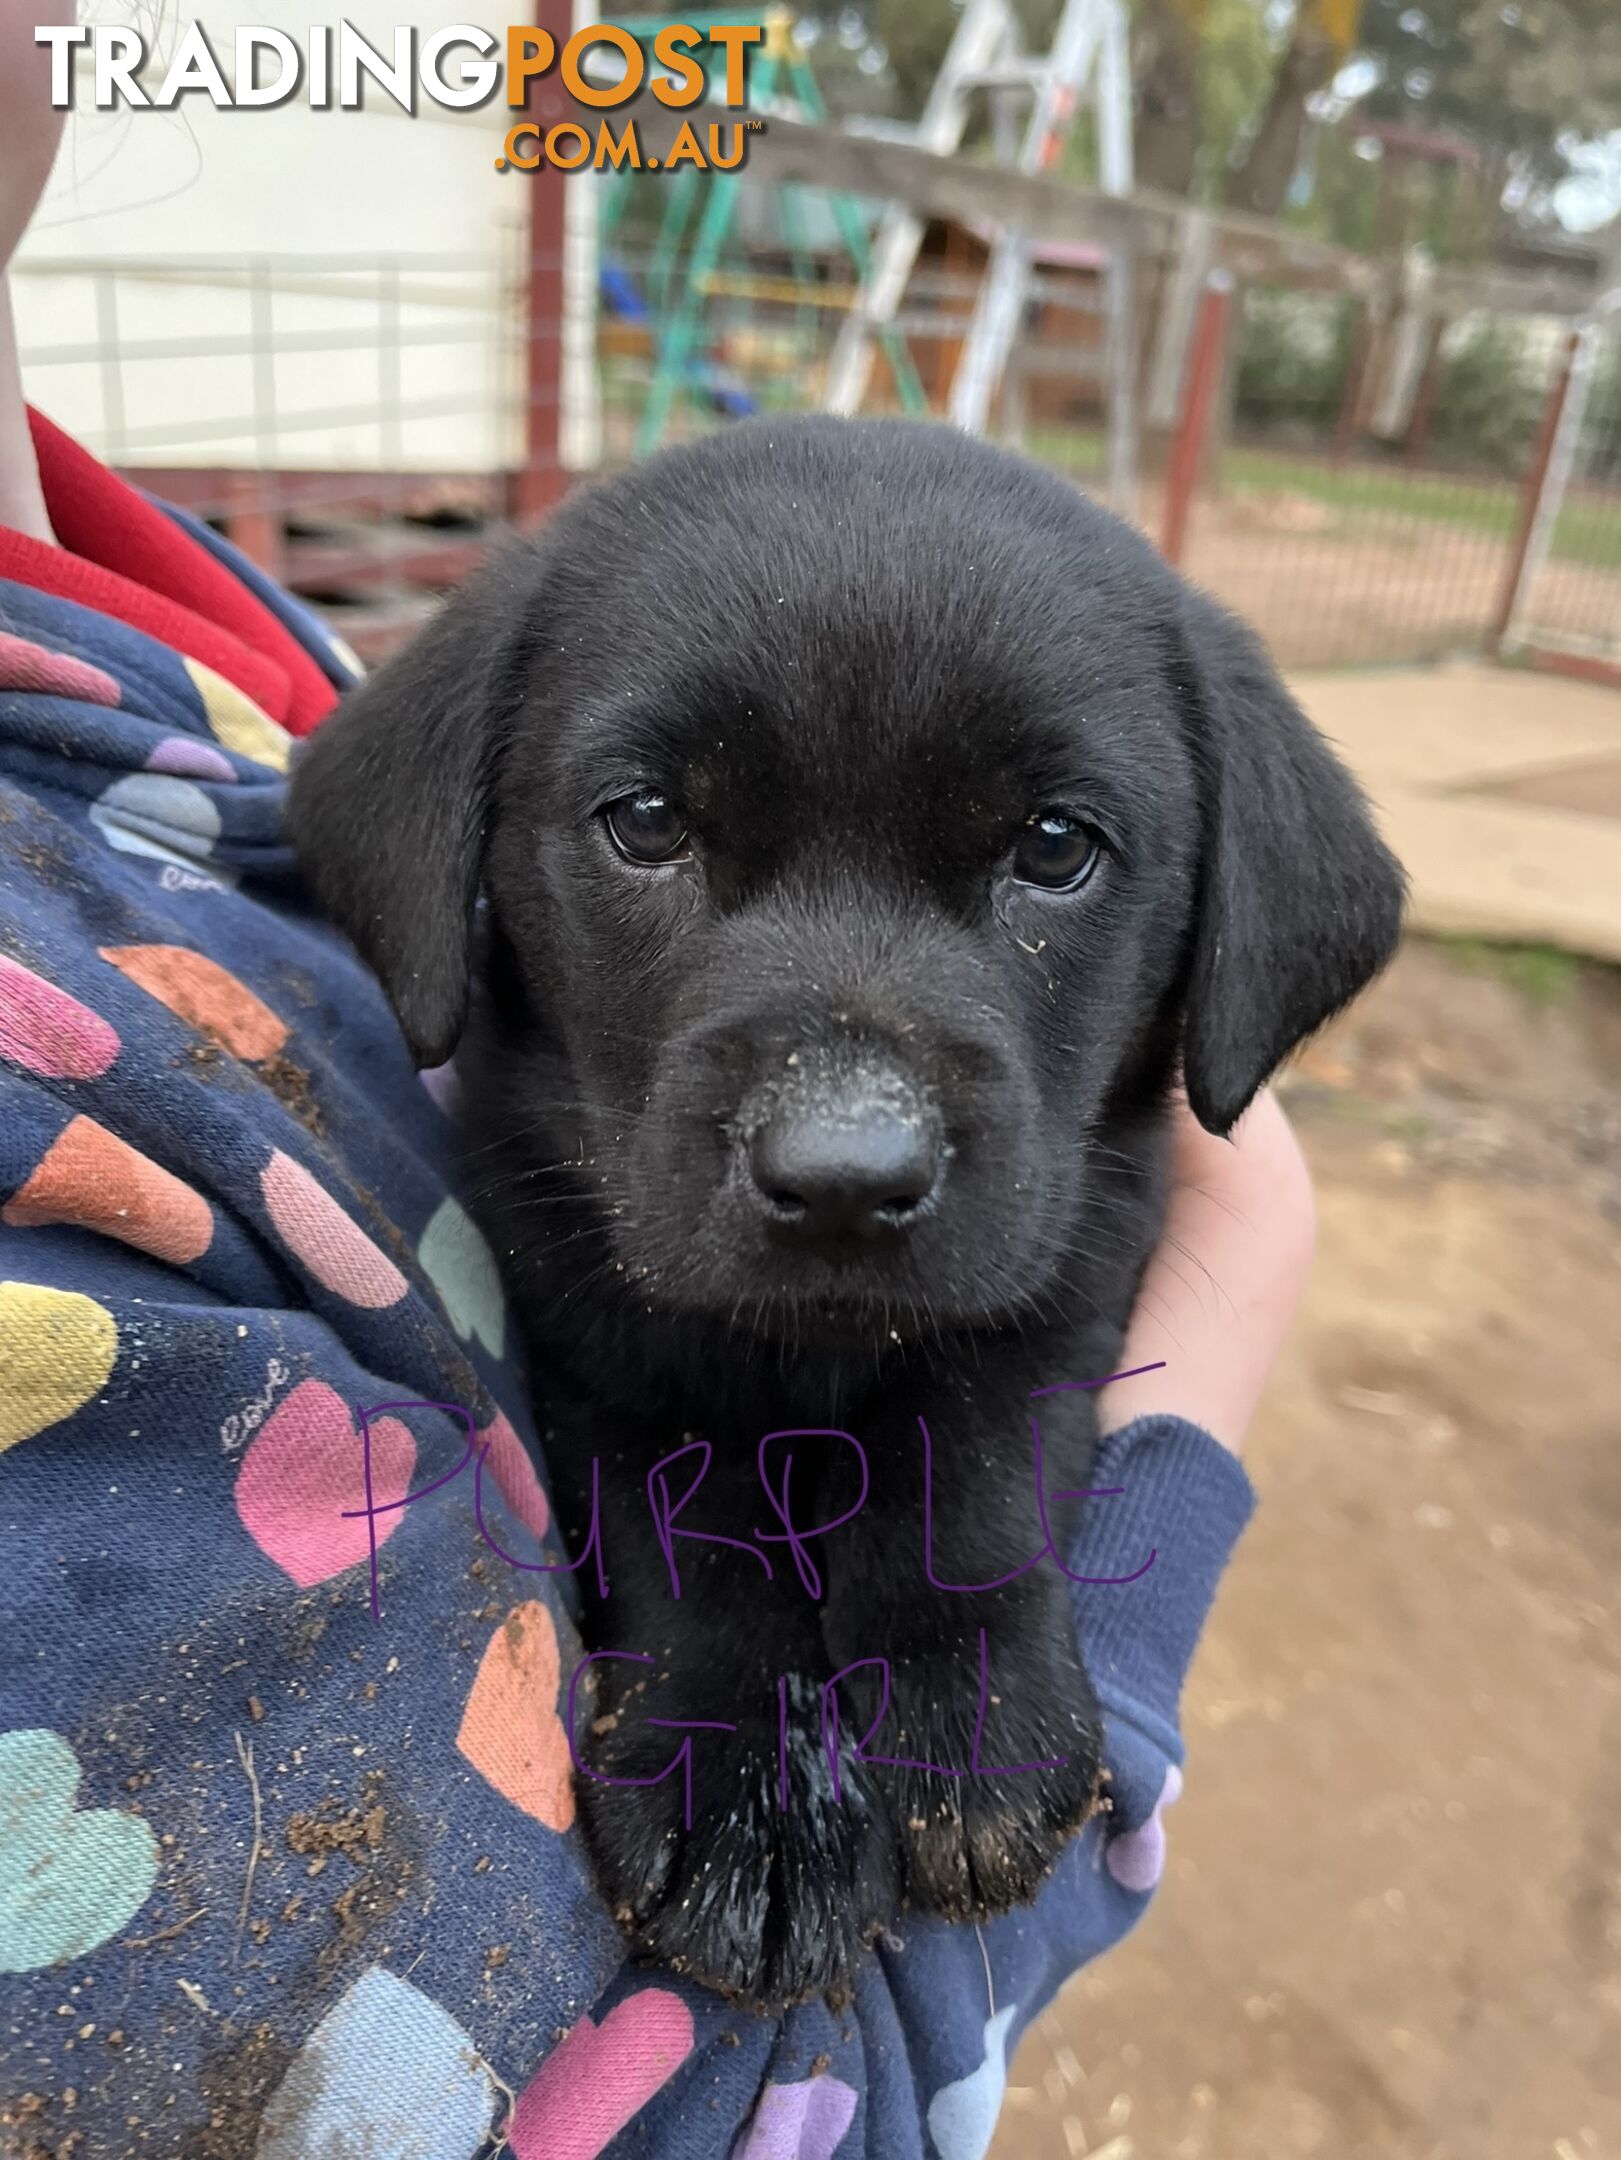 Pure Bred Labrador Puppies - PRICE REDUCED